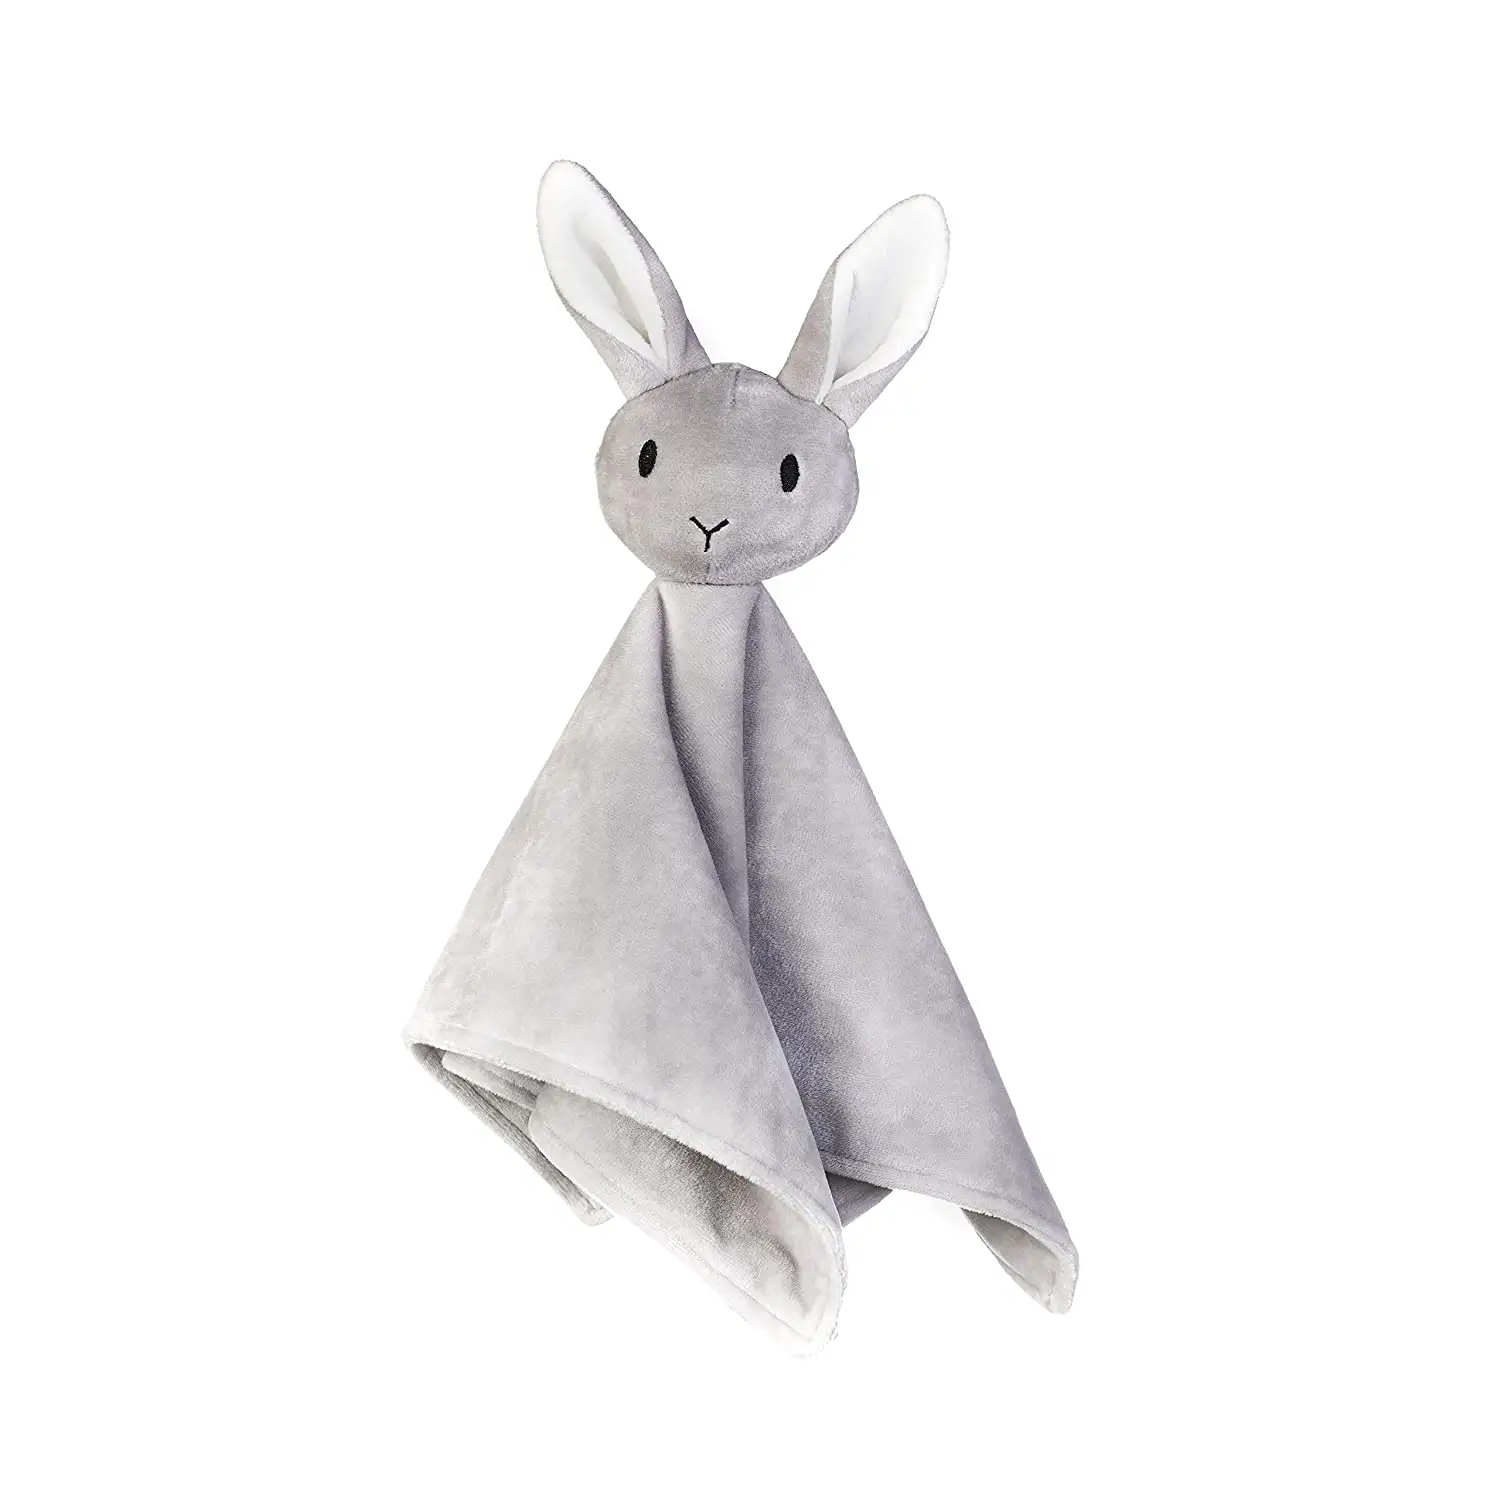 NEW Security Blanket for Babies Soft Stuffed Animal Baby Blankie Unisex Toddler Blanket with Sweet Adorable Bunny